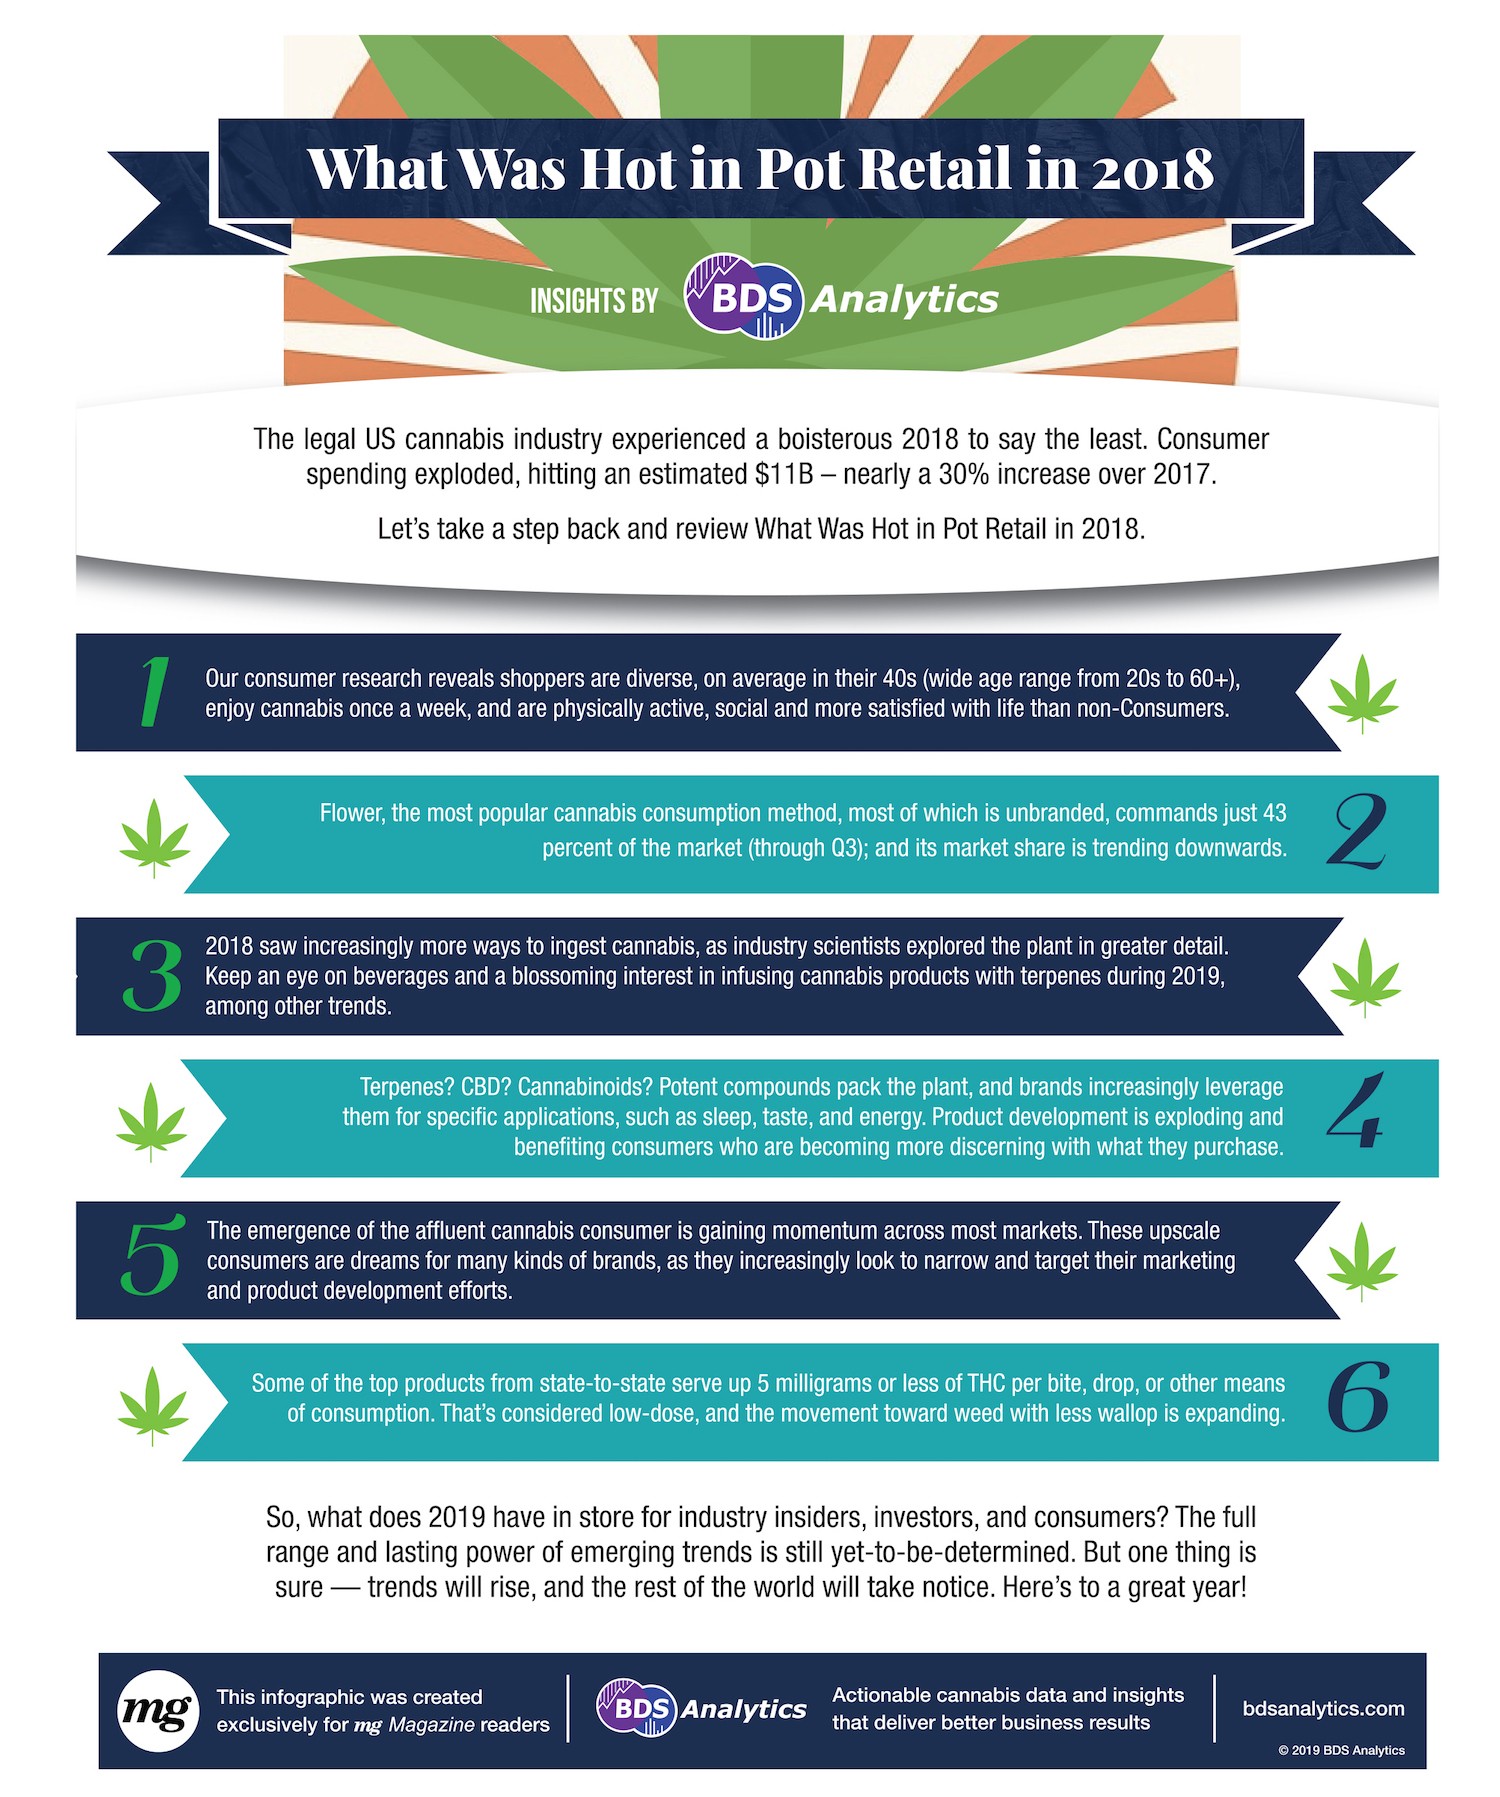 What Was Hot in Pot Retail in 2018? (Infographic)